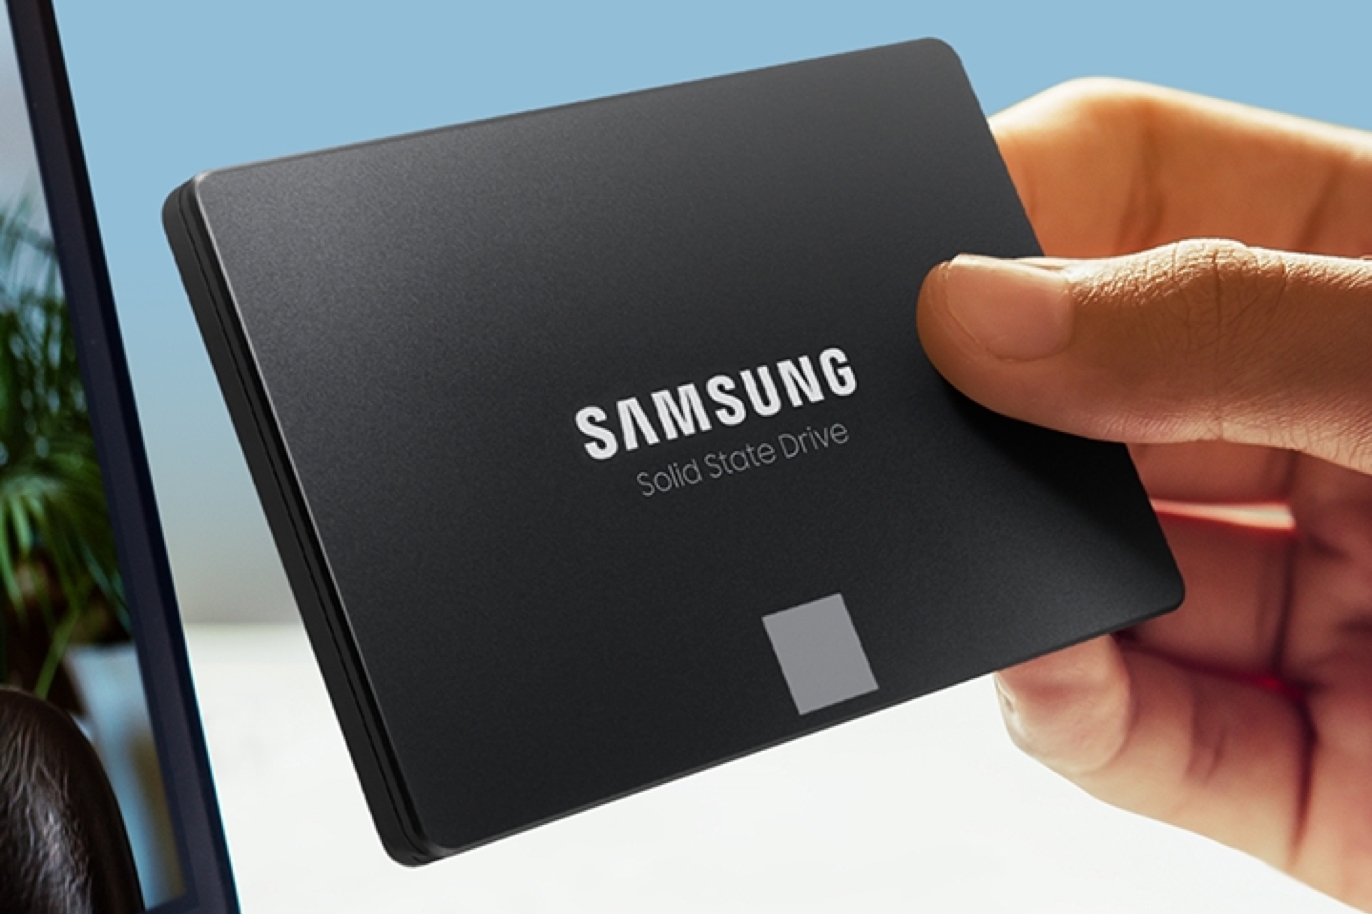 Samsung 870 EVO MZ-77E1T0B - SSD - 1 TB - SATA 6Gb/s - MZ-77E1T0B/AM -  Solid State Drives - CDW.ca